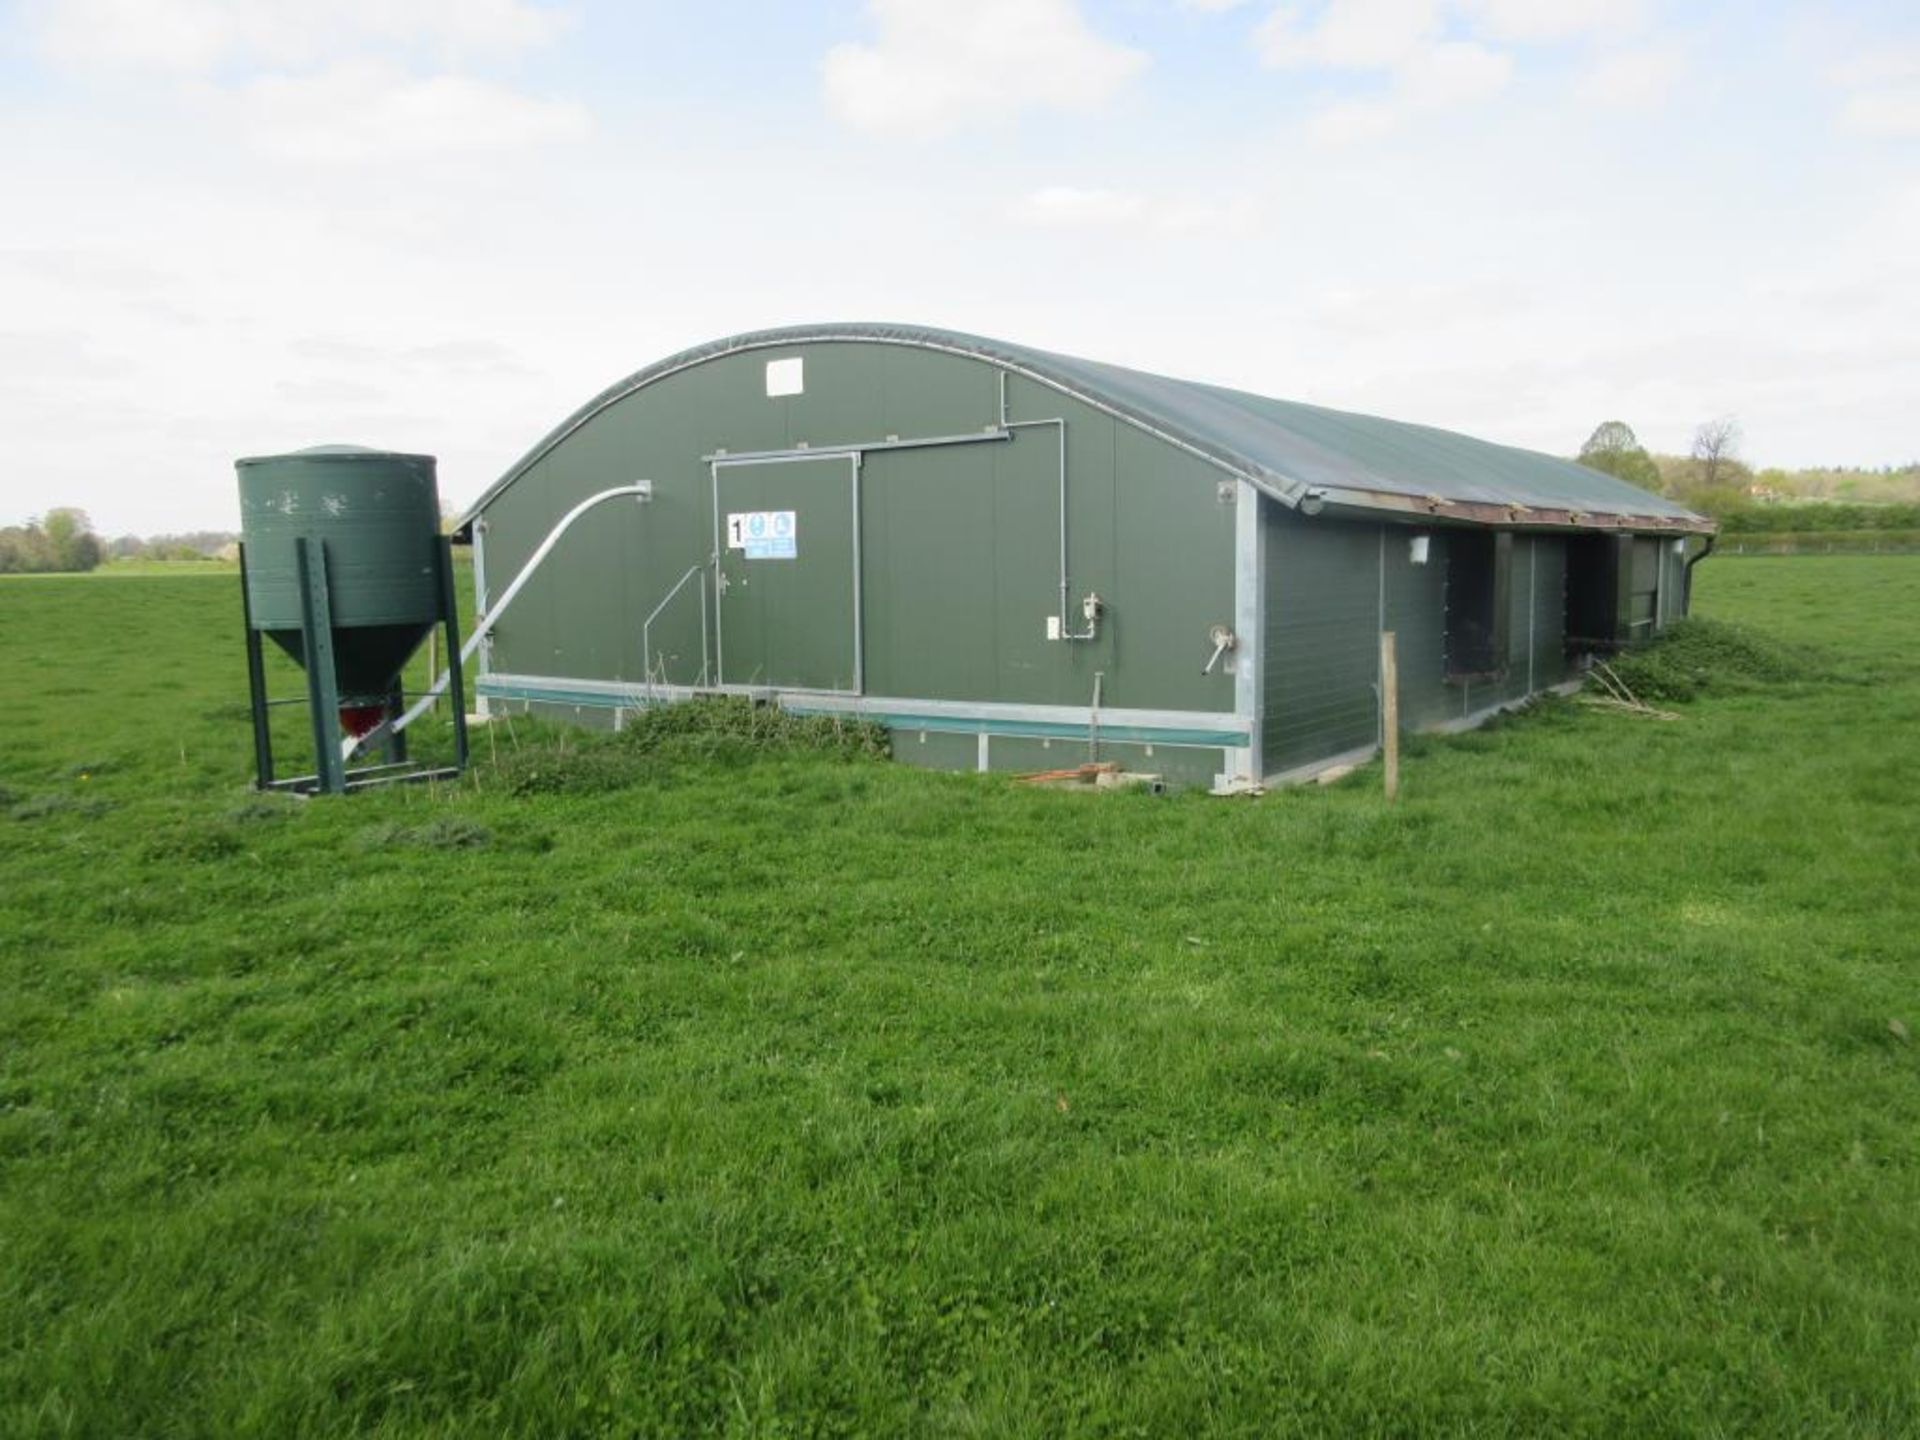 Halo pullet-rearing sheds; 6no 18m x9m mobile rearing sheds. 3 Purchased in February 2011; 3